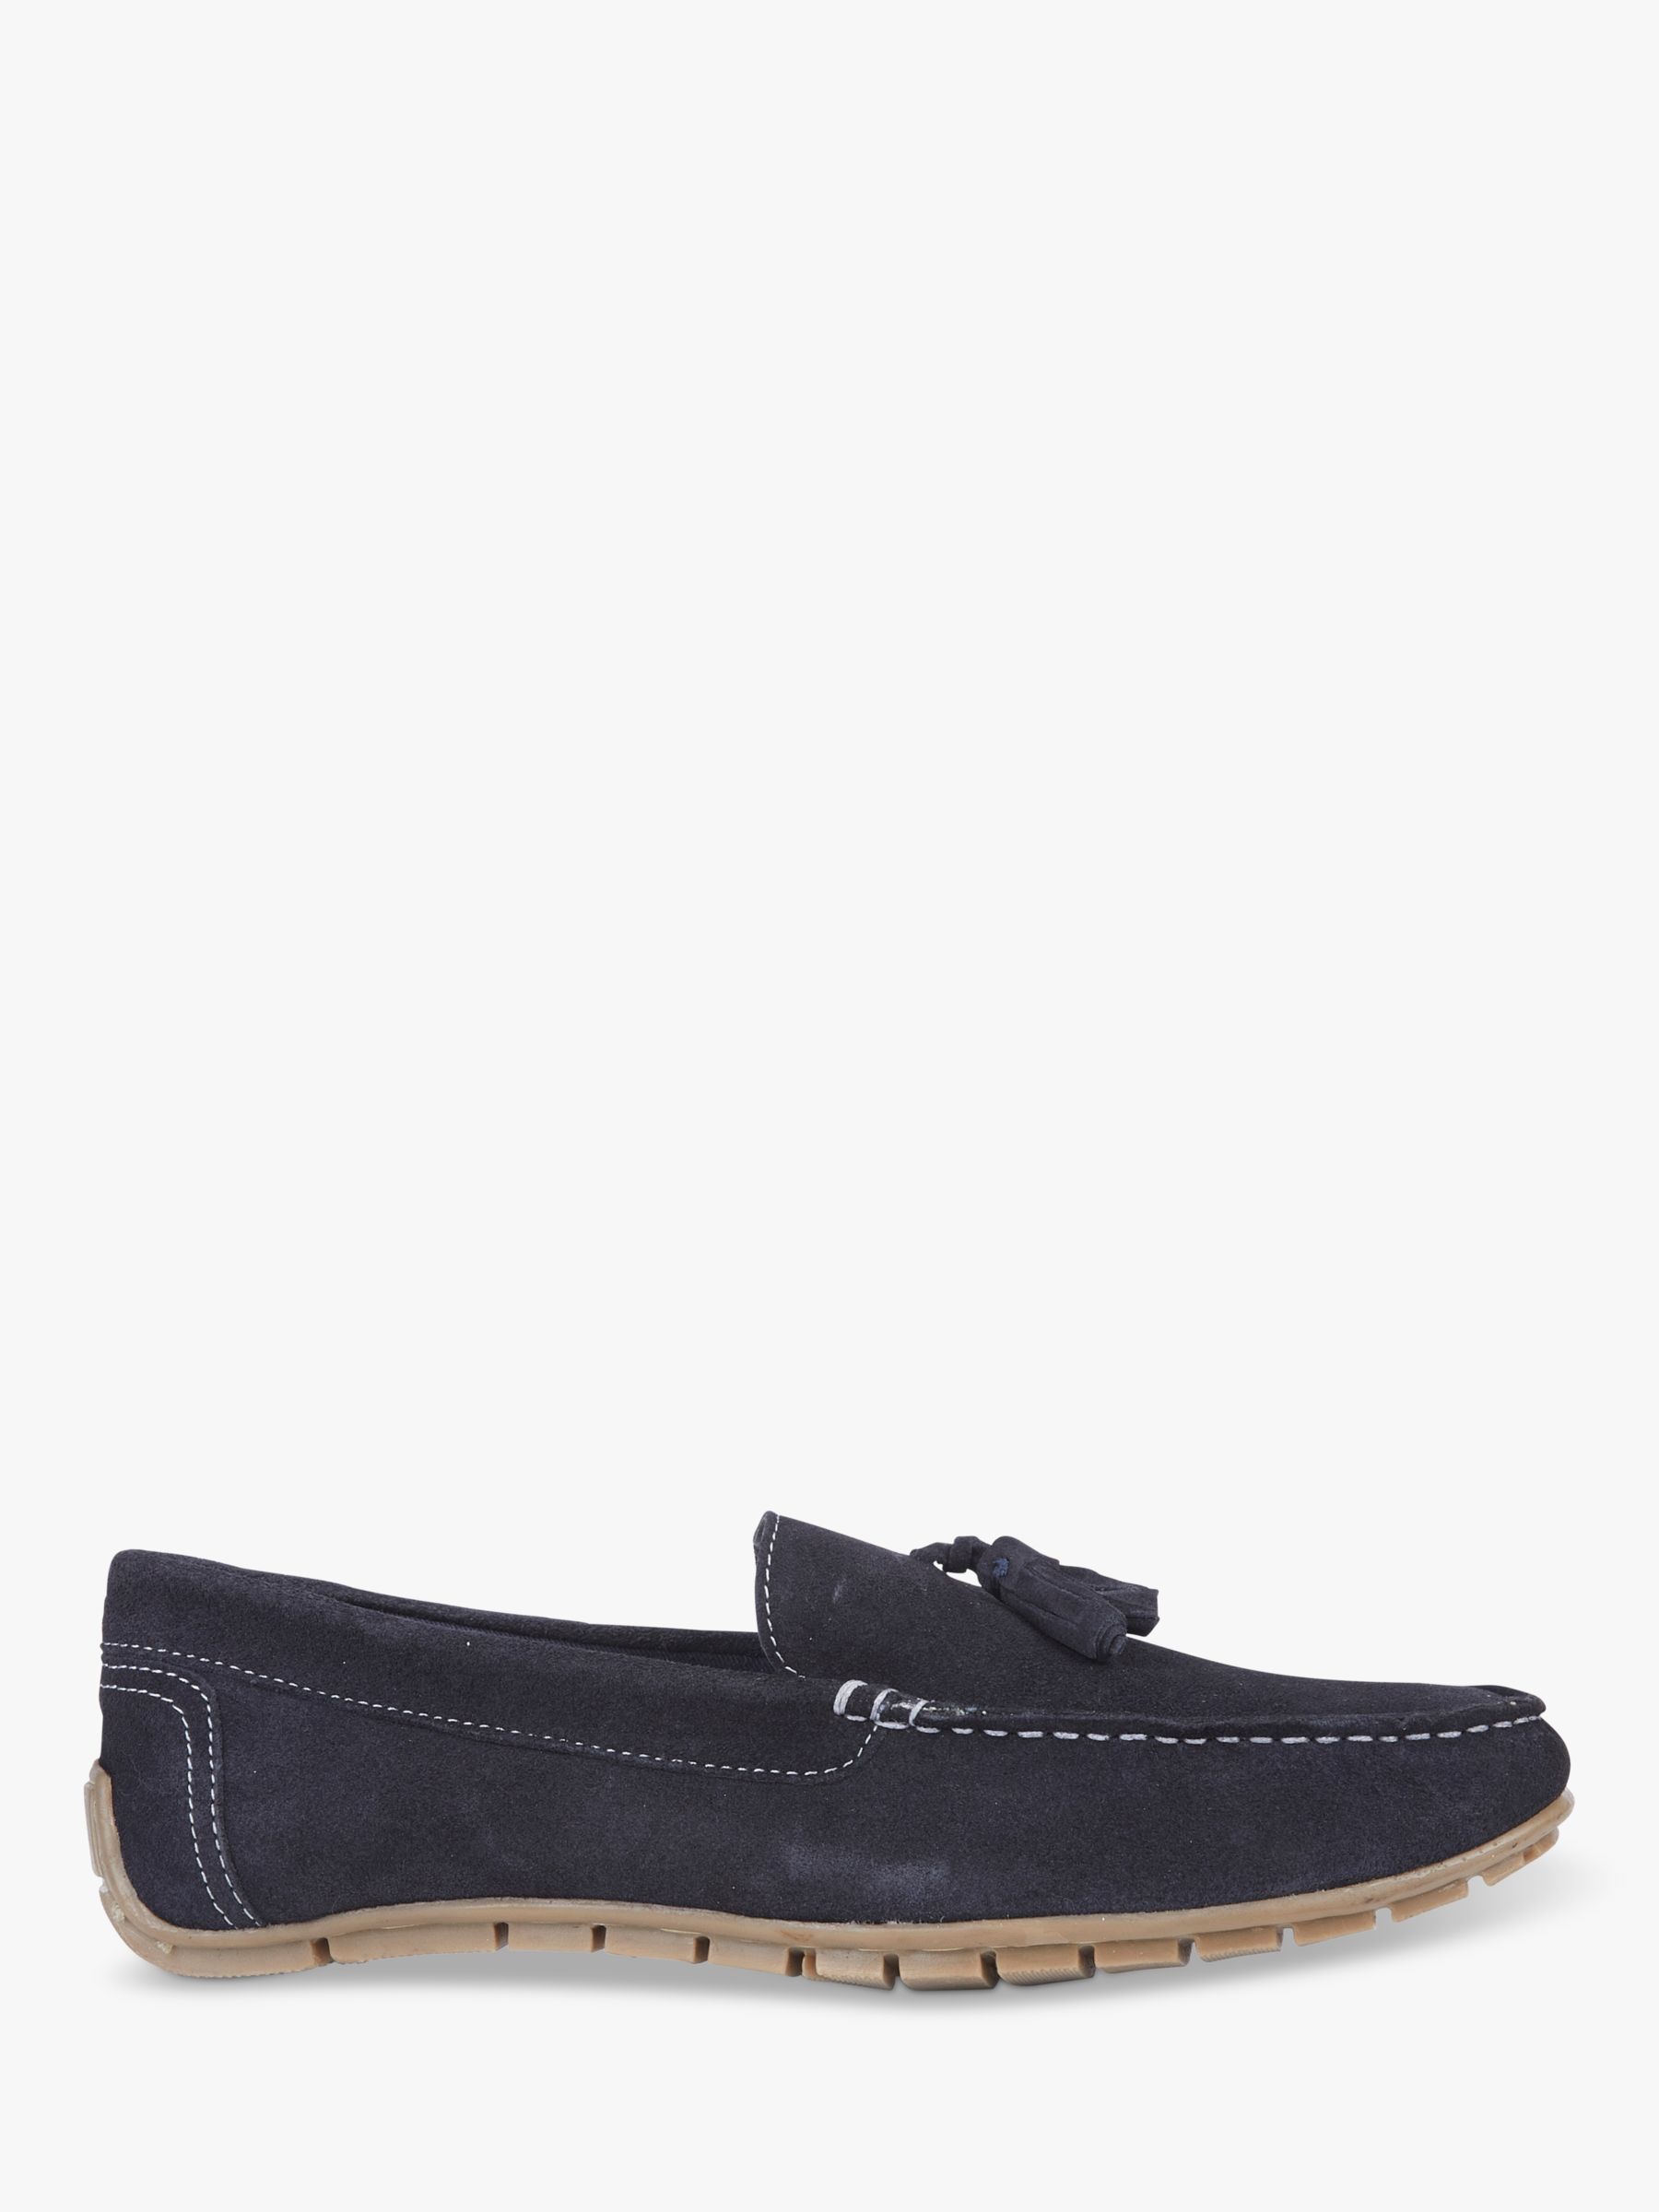 Silver Street London Monza Suede Loafers, Navy at John Lewis & Partners